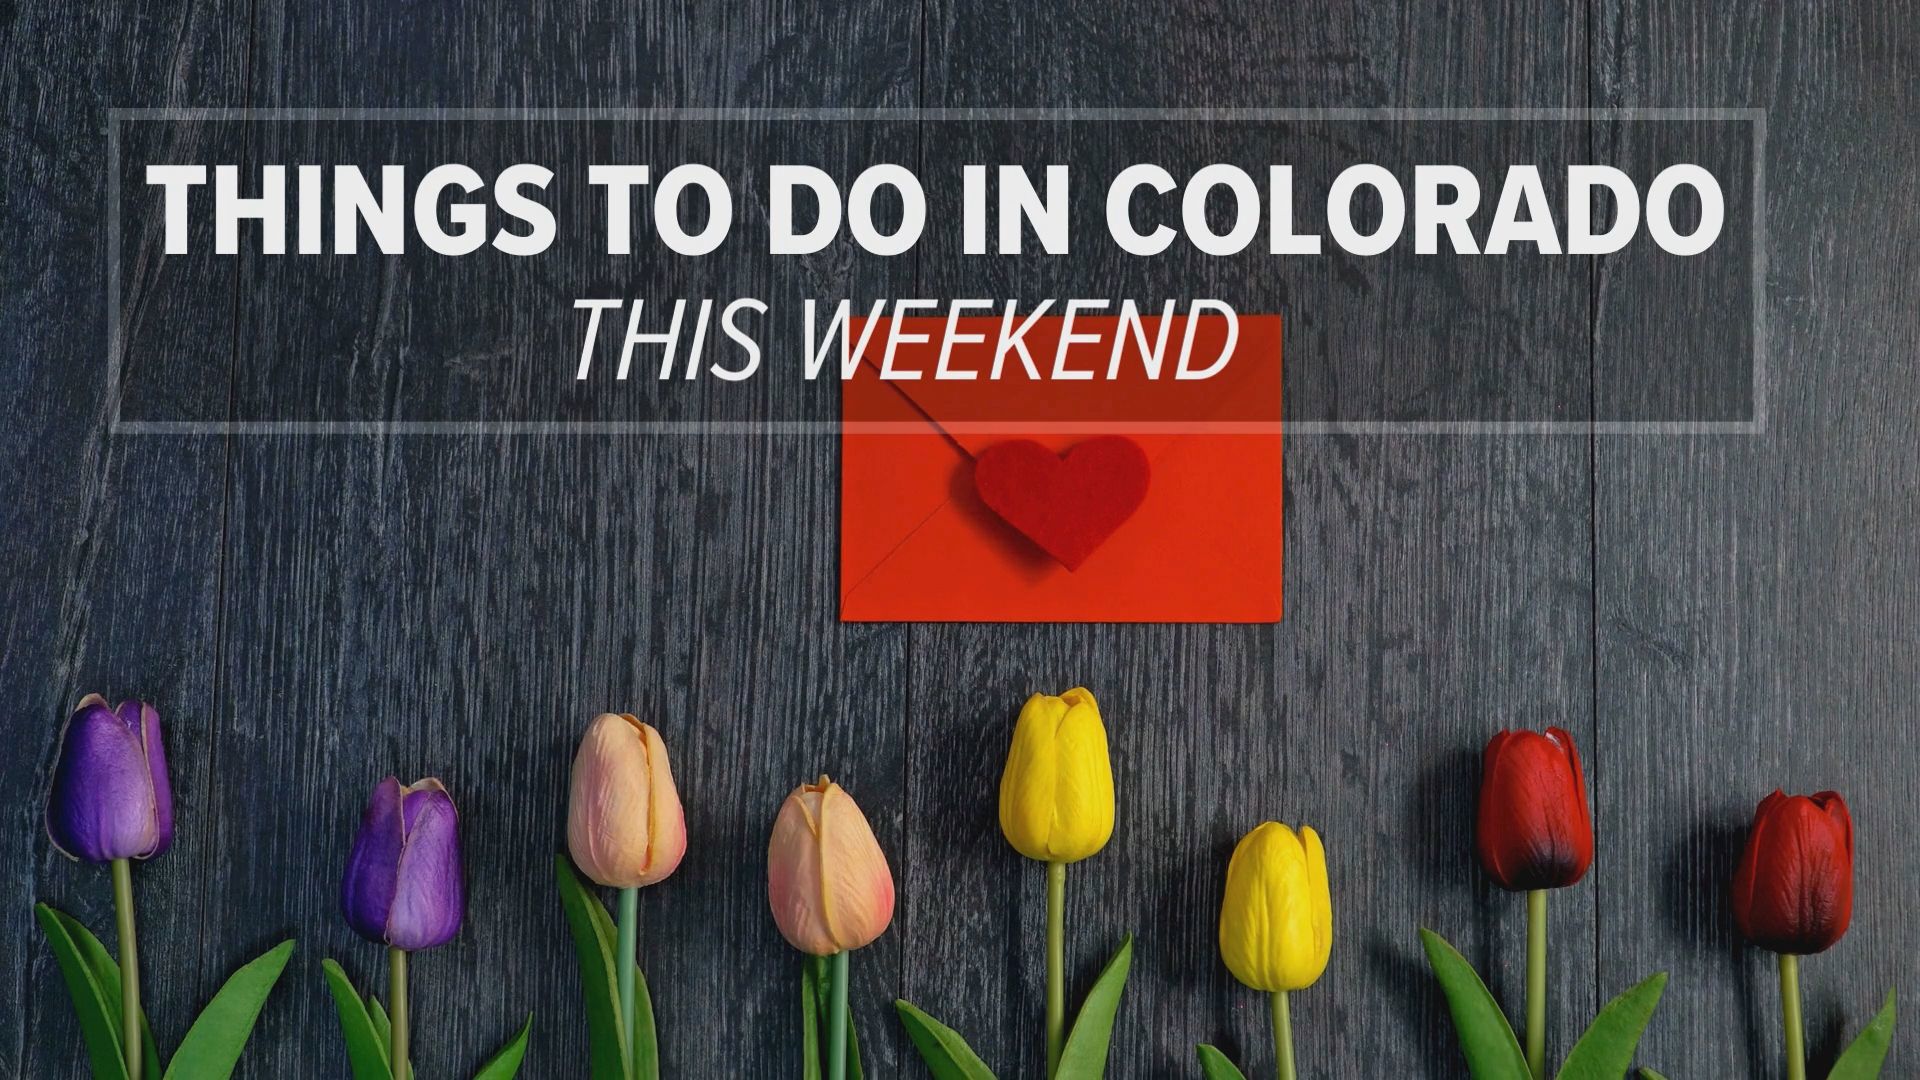 No matter where you live in Colorado, there's a unique experience waiting for you this Mother's Day weekend.